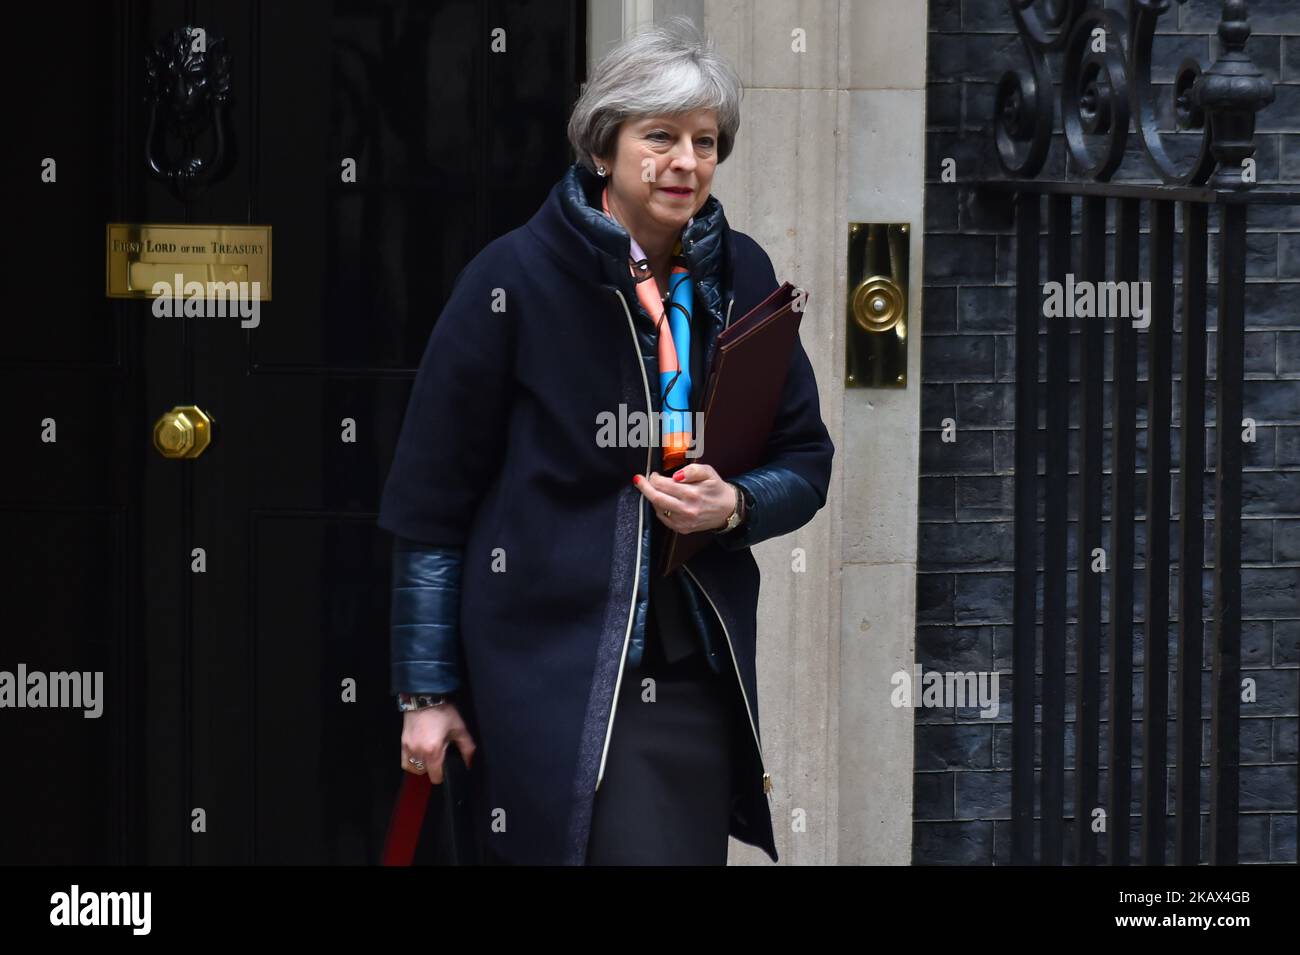 Prime Minister Theresa May leaves Downing Street after attending the weekly Cabinet meeting, London, UK on March 13, 2018. Prime Minister Theresa May and Chancellor of the Exchequer Philip Hammond headed to the Houses of Parliament as he gives Spring Budget update. (Photo by Alberto Pezzali/NurPhoto) Stock Photo